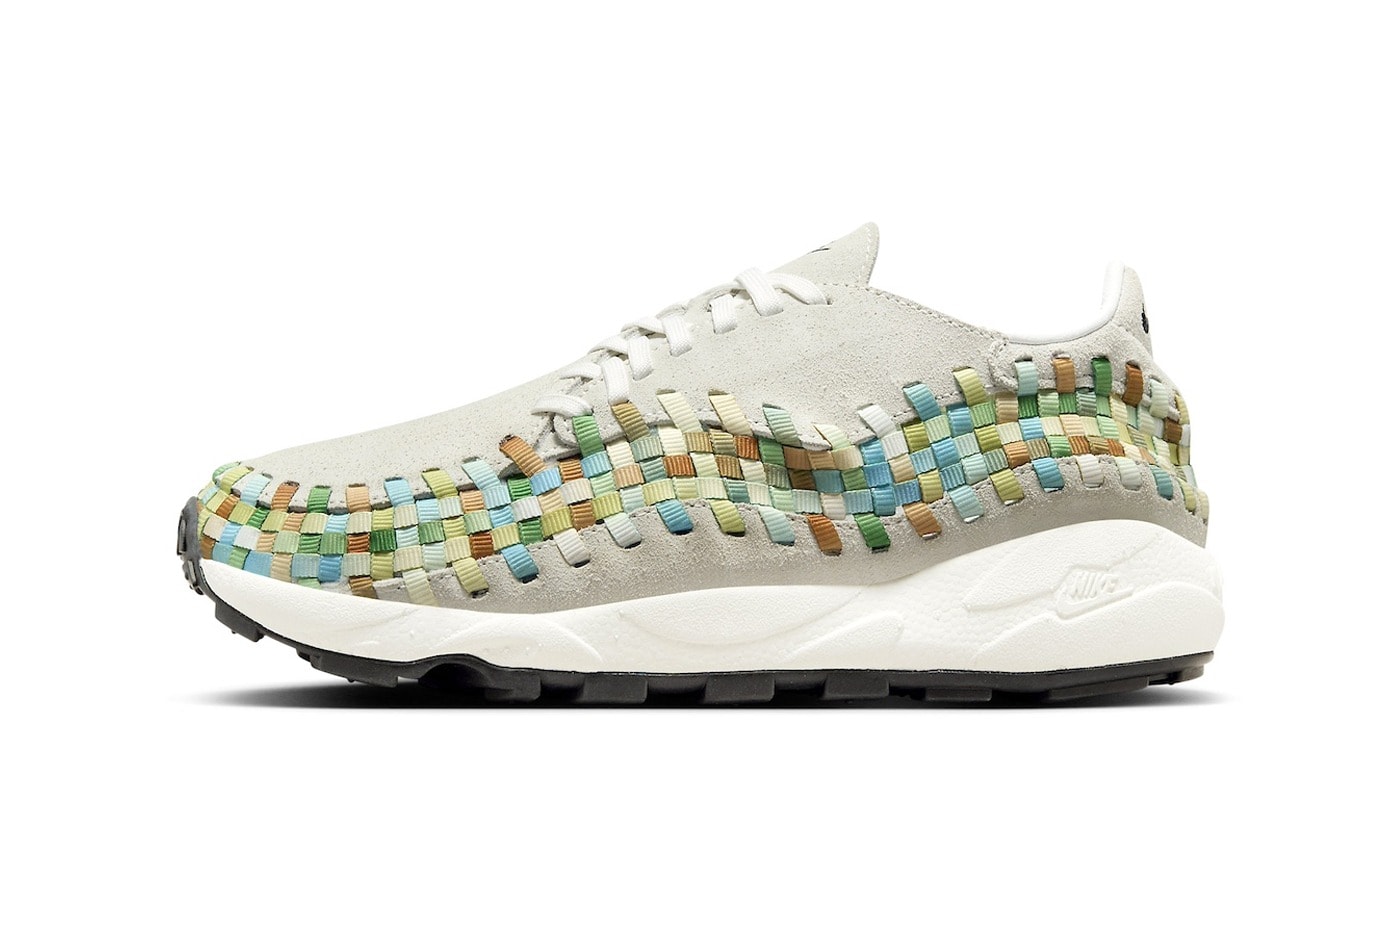 Nike 正式推出 Air Footscape Woven 全新配色「Rainbow」